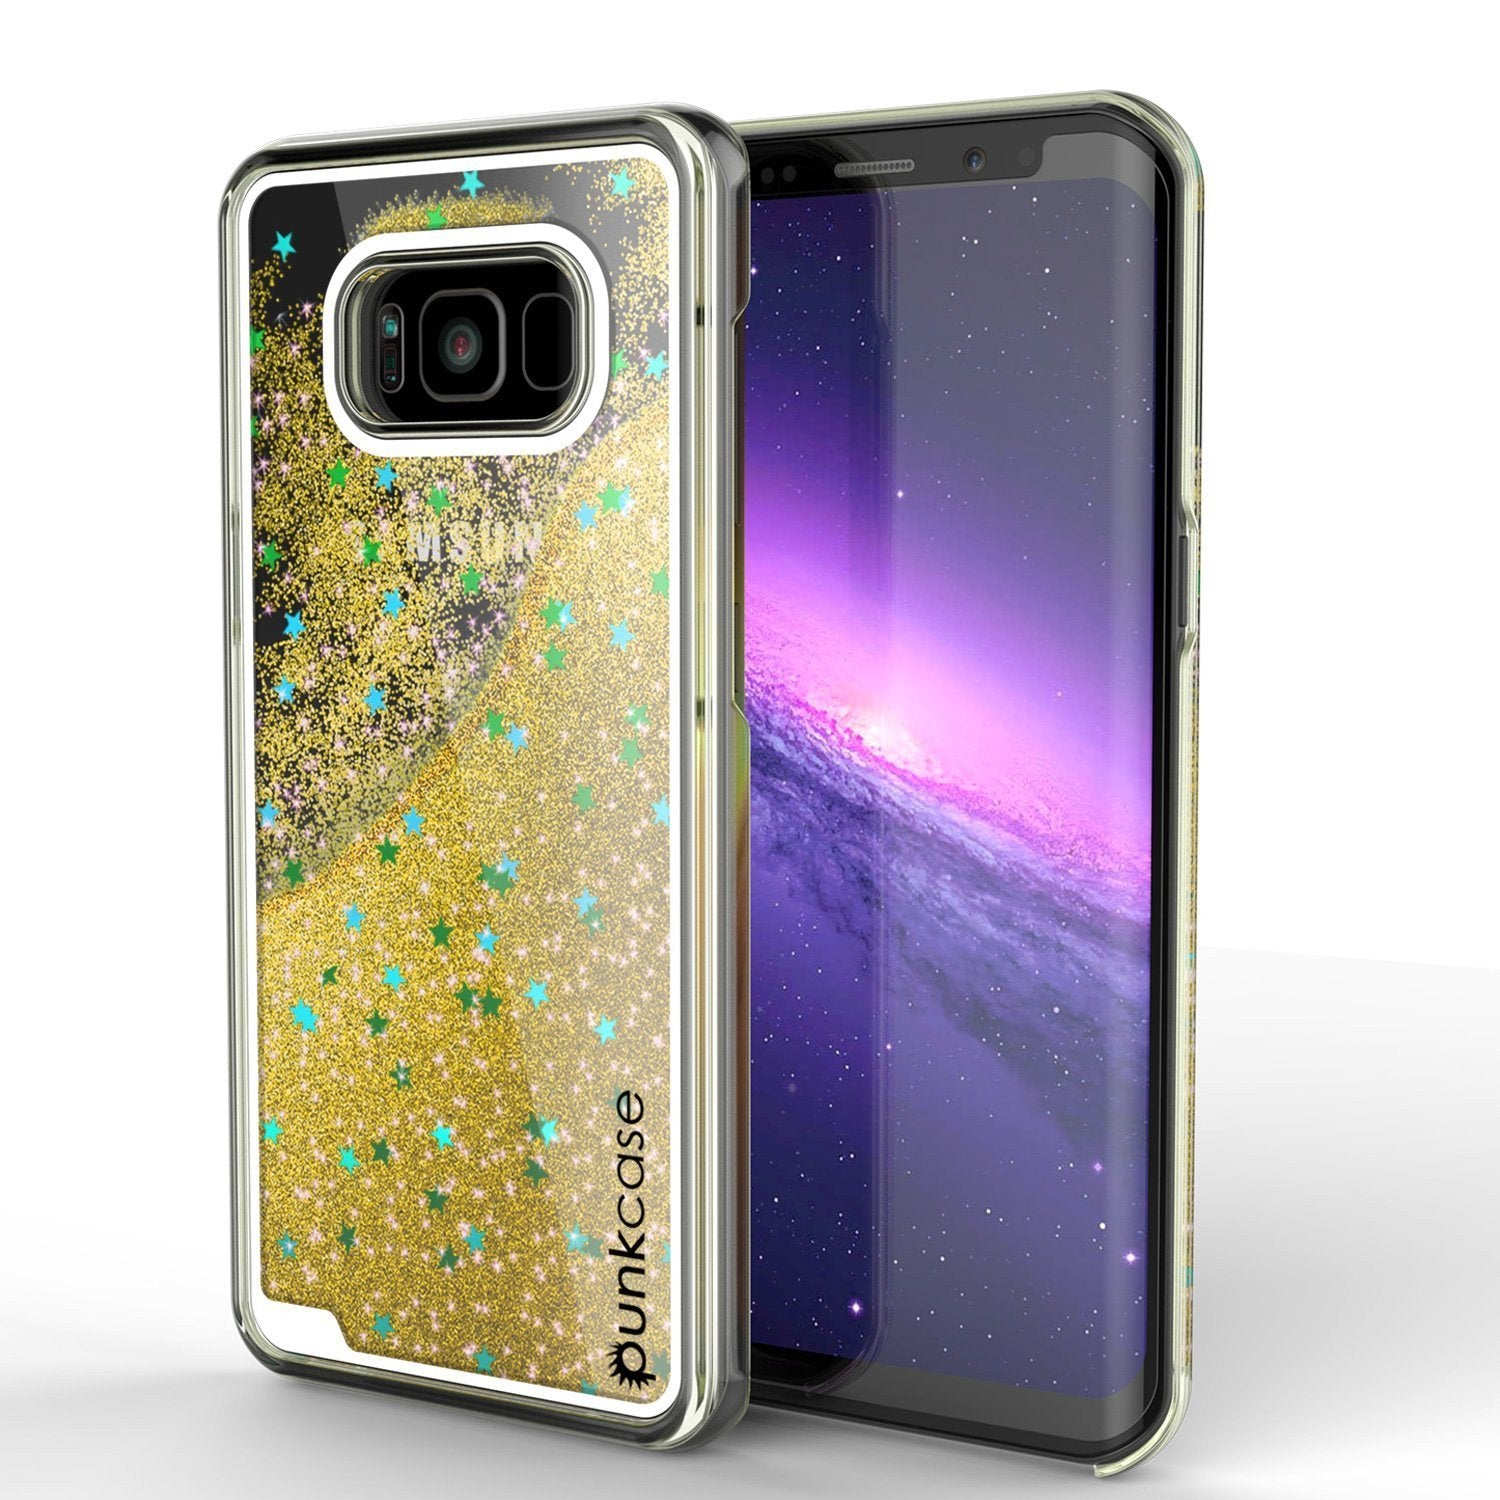 Galaxy S8 Case, Punkcase Liquid Gold Series Protective Dual Layer Floating Glitter Cover